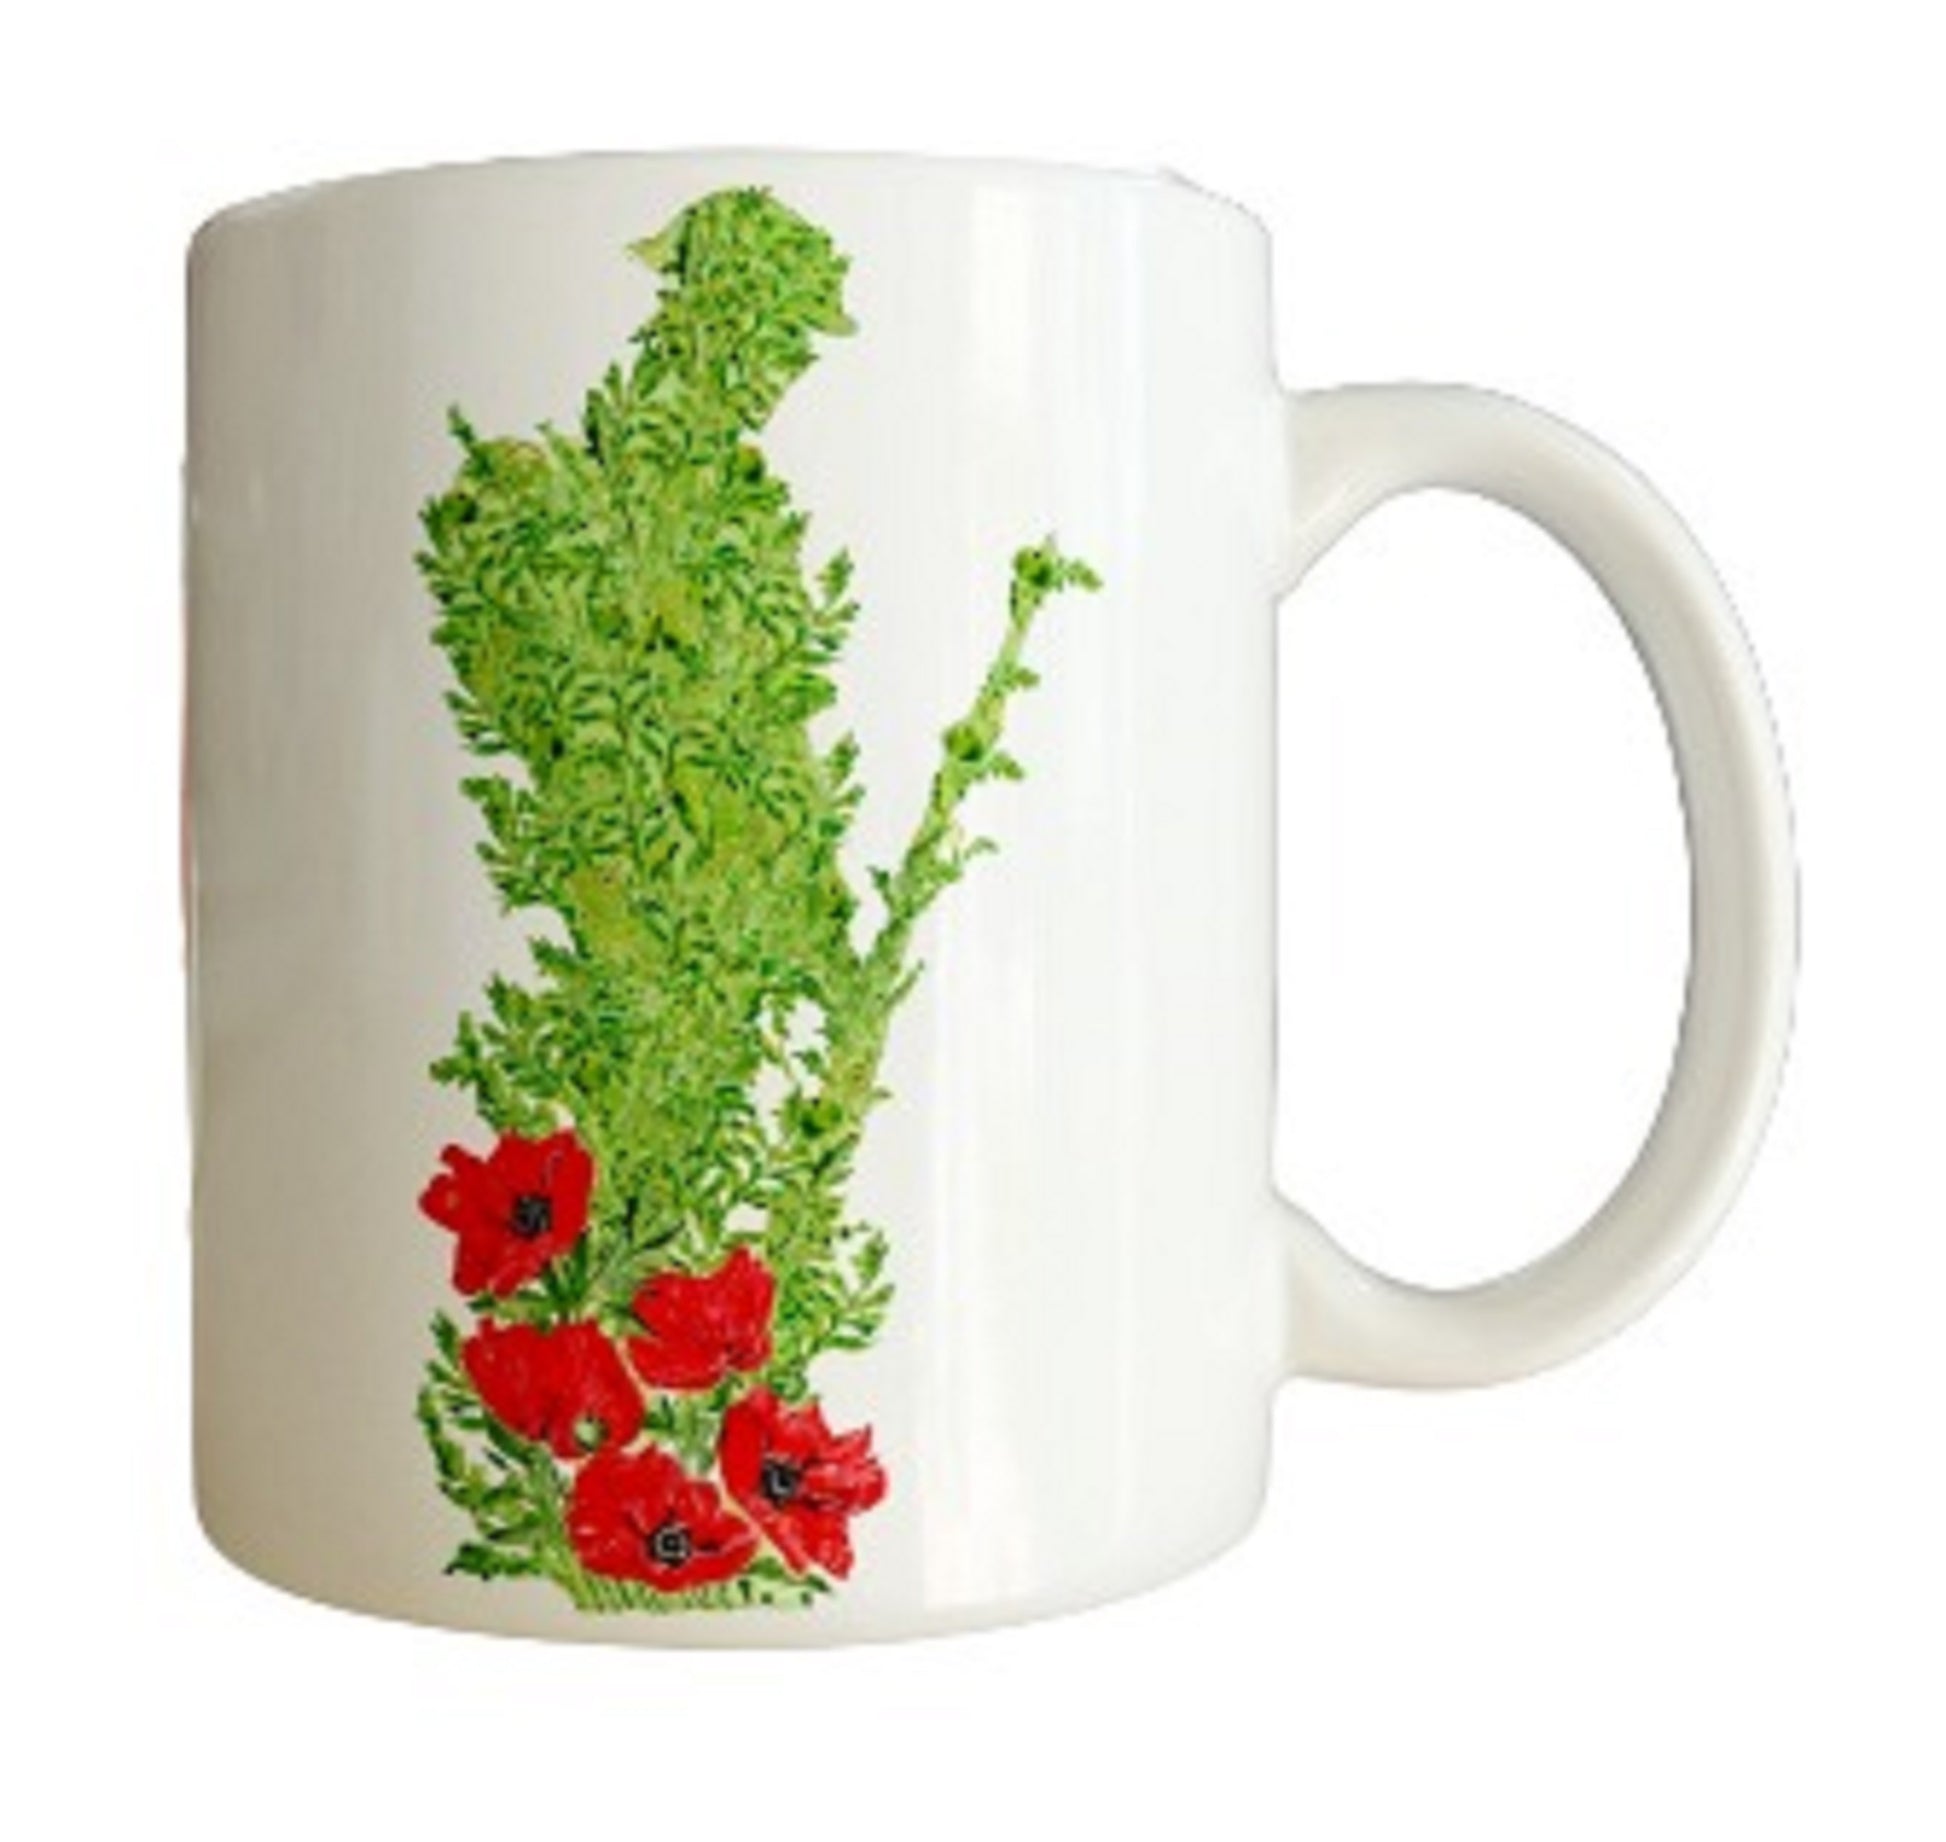  Soldier Made of Poppies Remembrance Mug by Free Spirit Accessories sold by Free Spirit Accessories